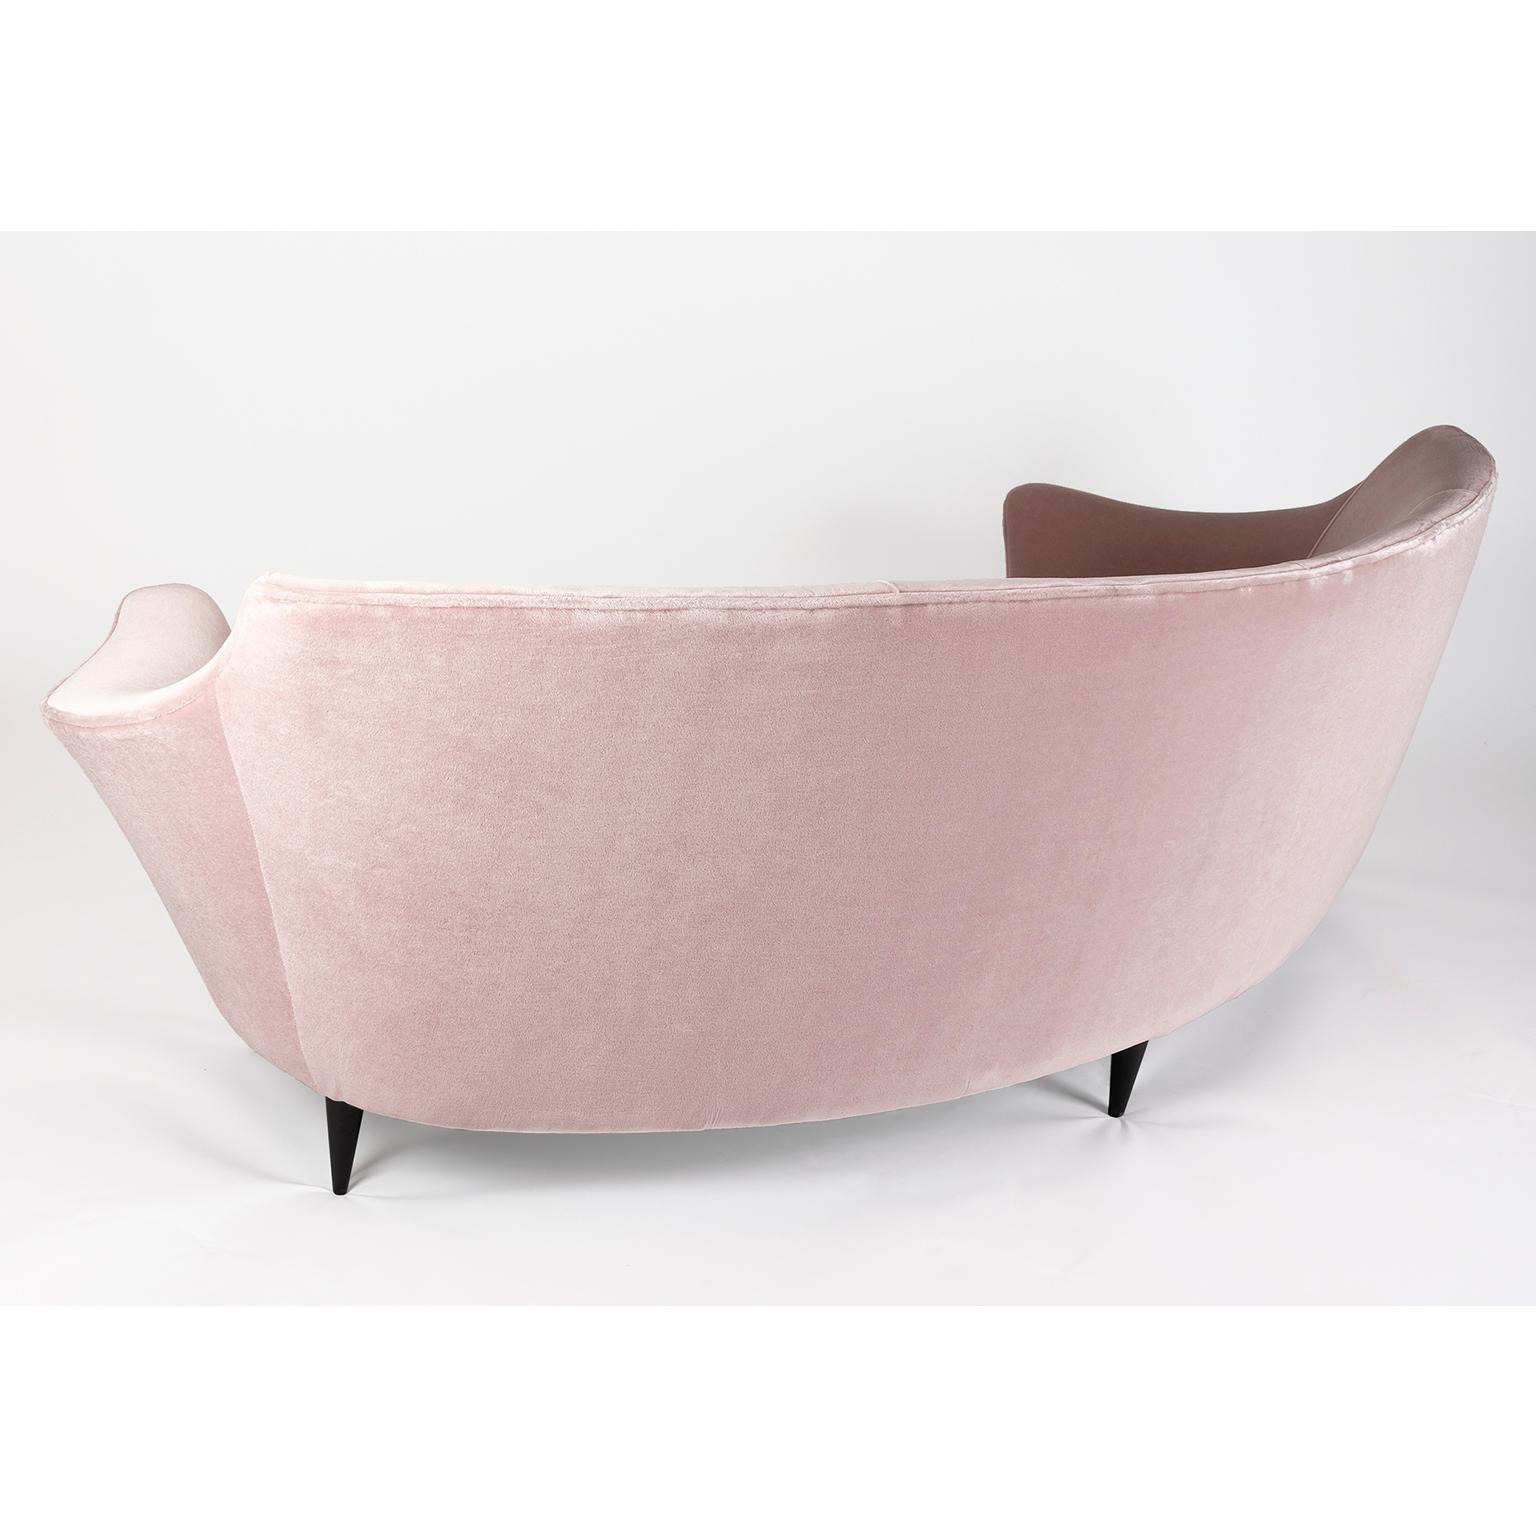 Ico Parisi Curved Four Seat Sofa, Italy, 1951 For Sale 4